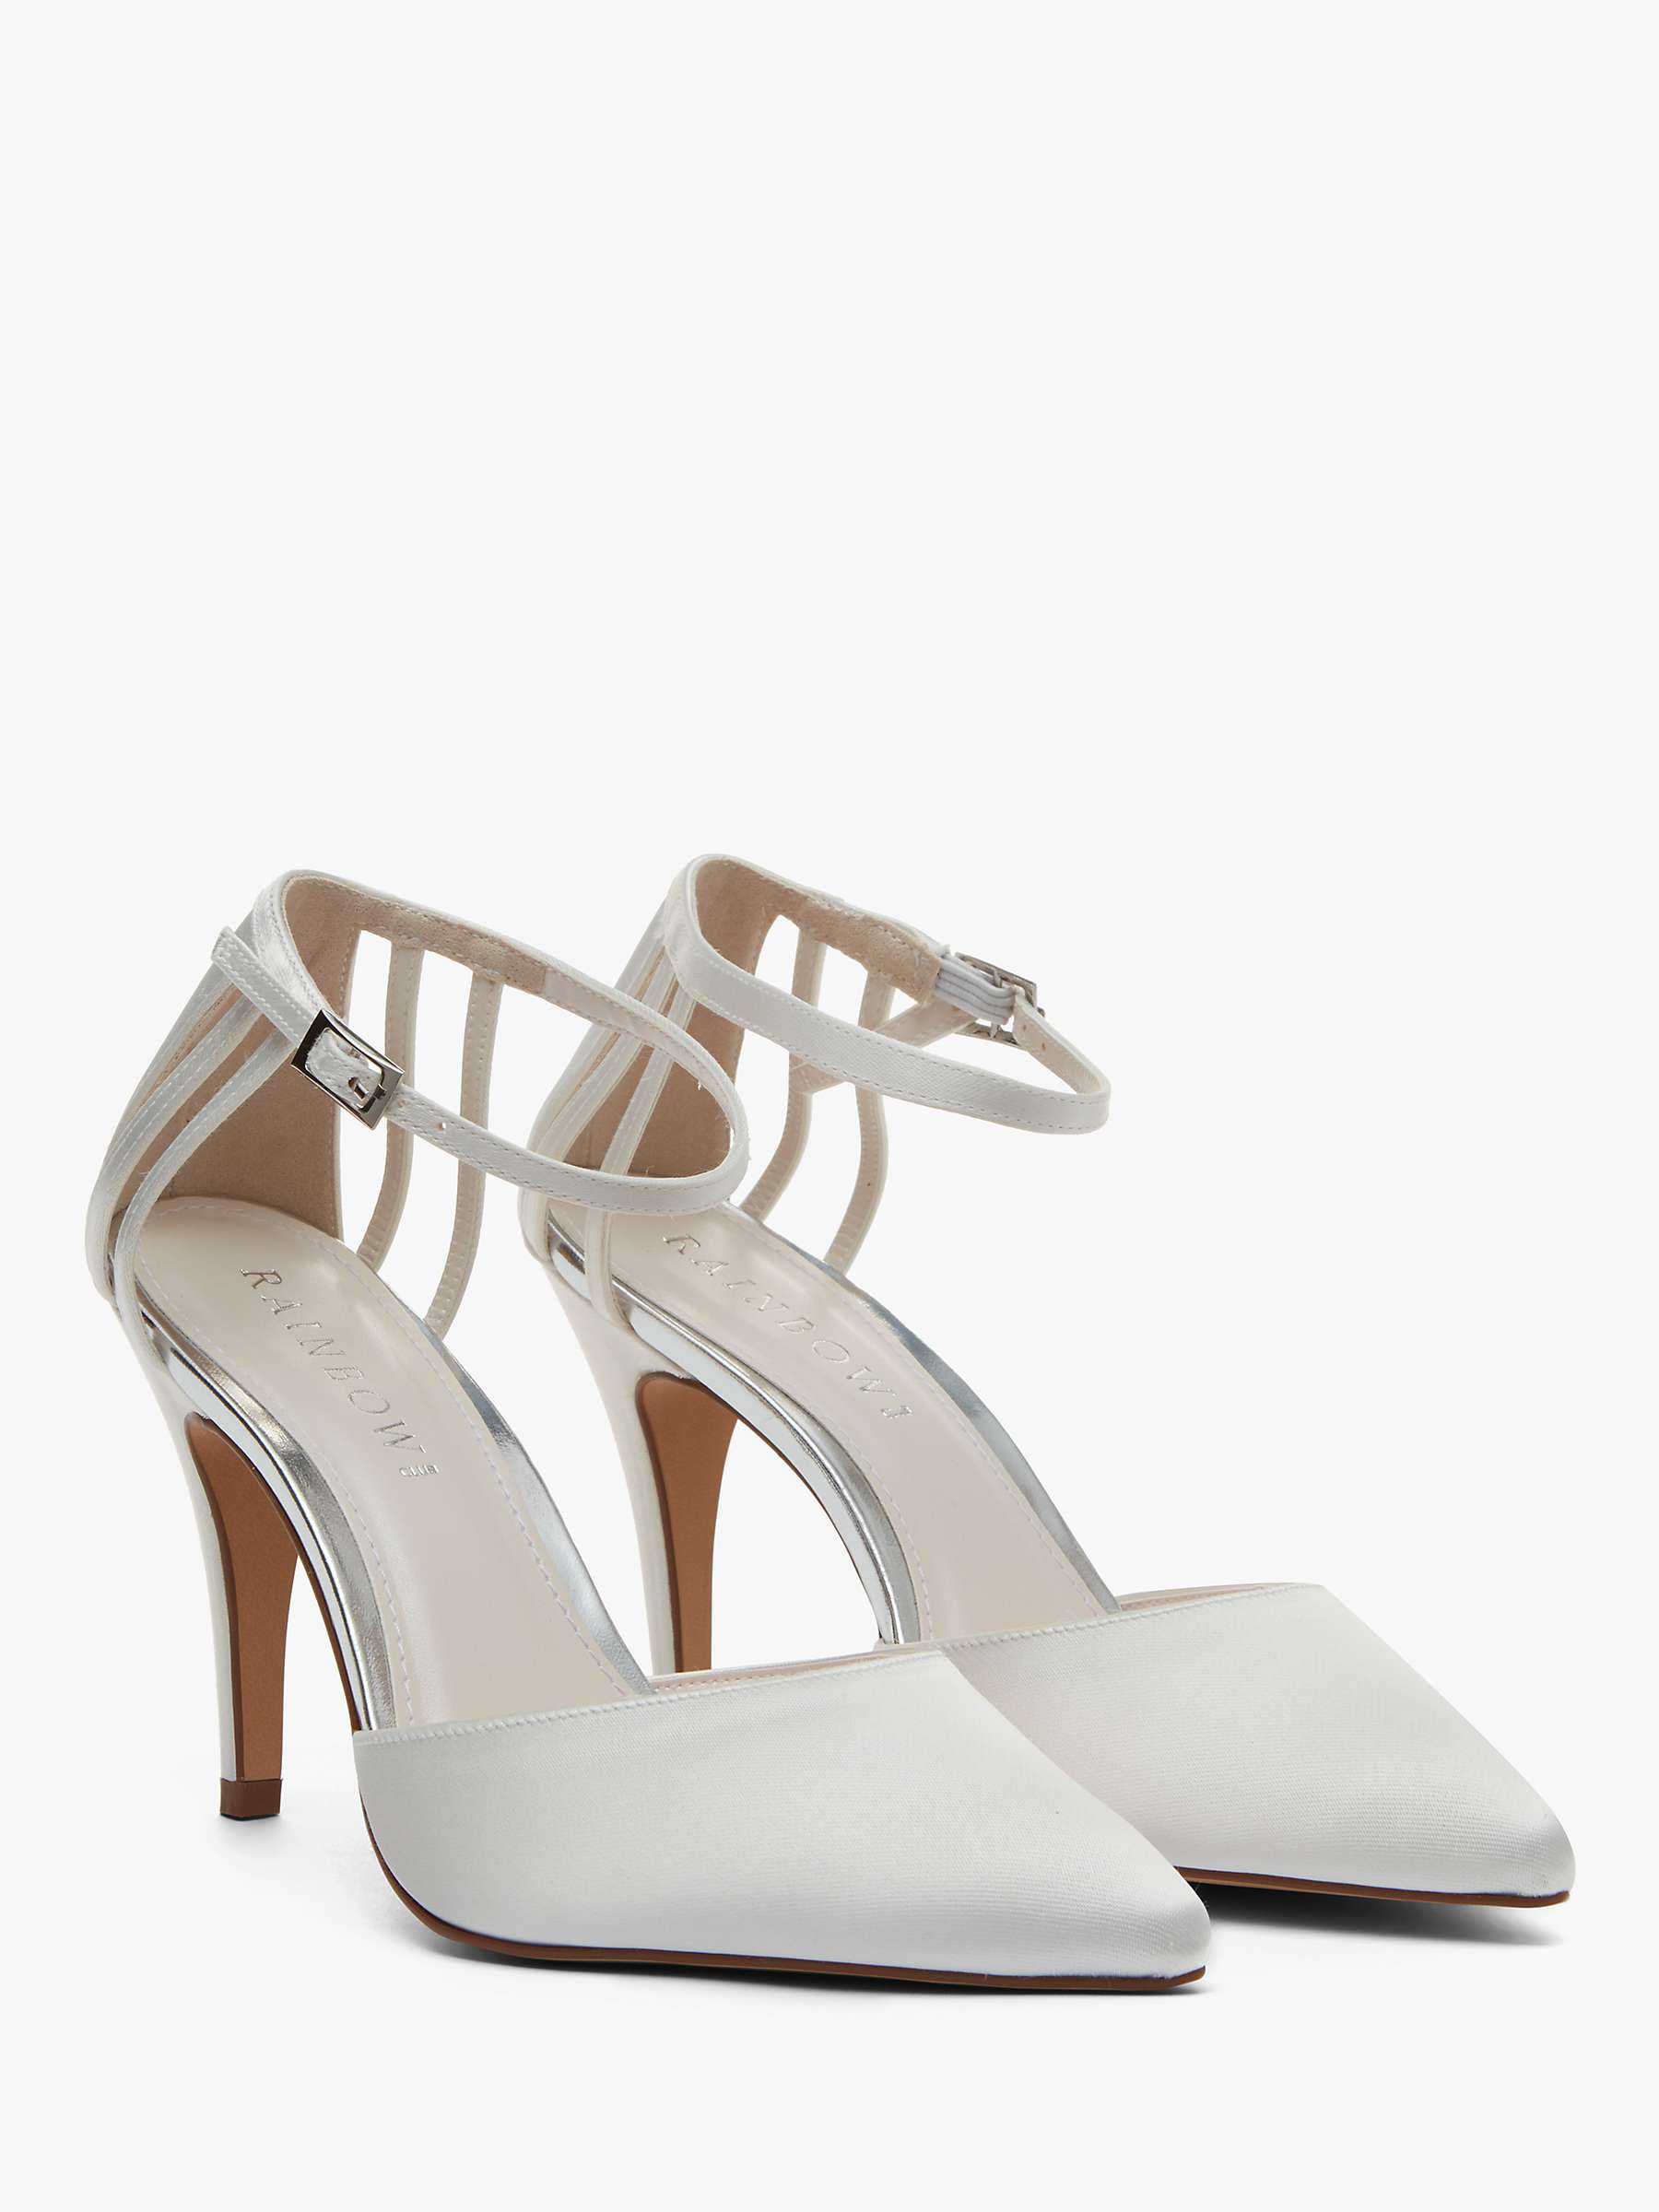 Buy Rainbow Club Kennedy Strappy Stiletto Heel Court Shoes, Ivory Online at johnlewis.com